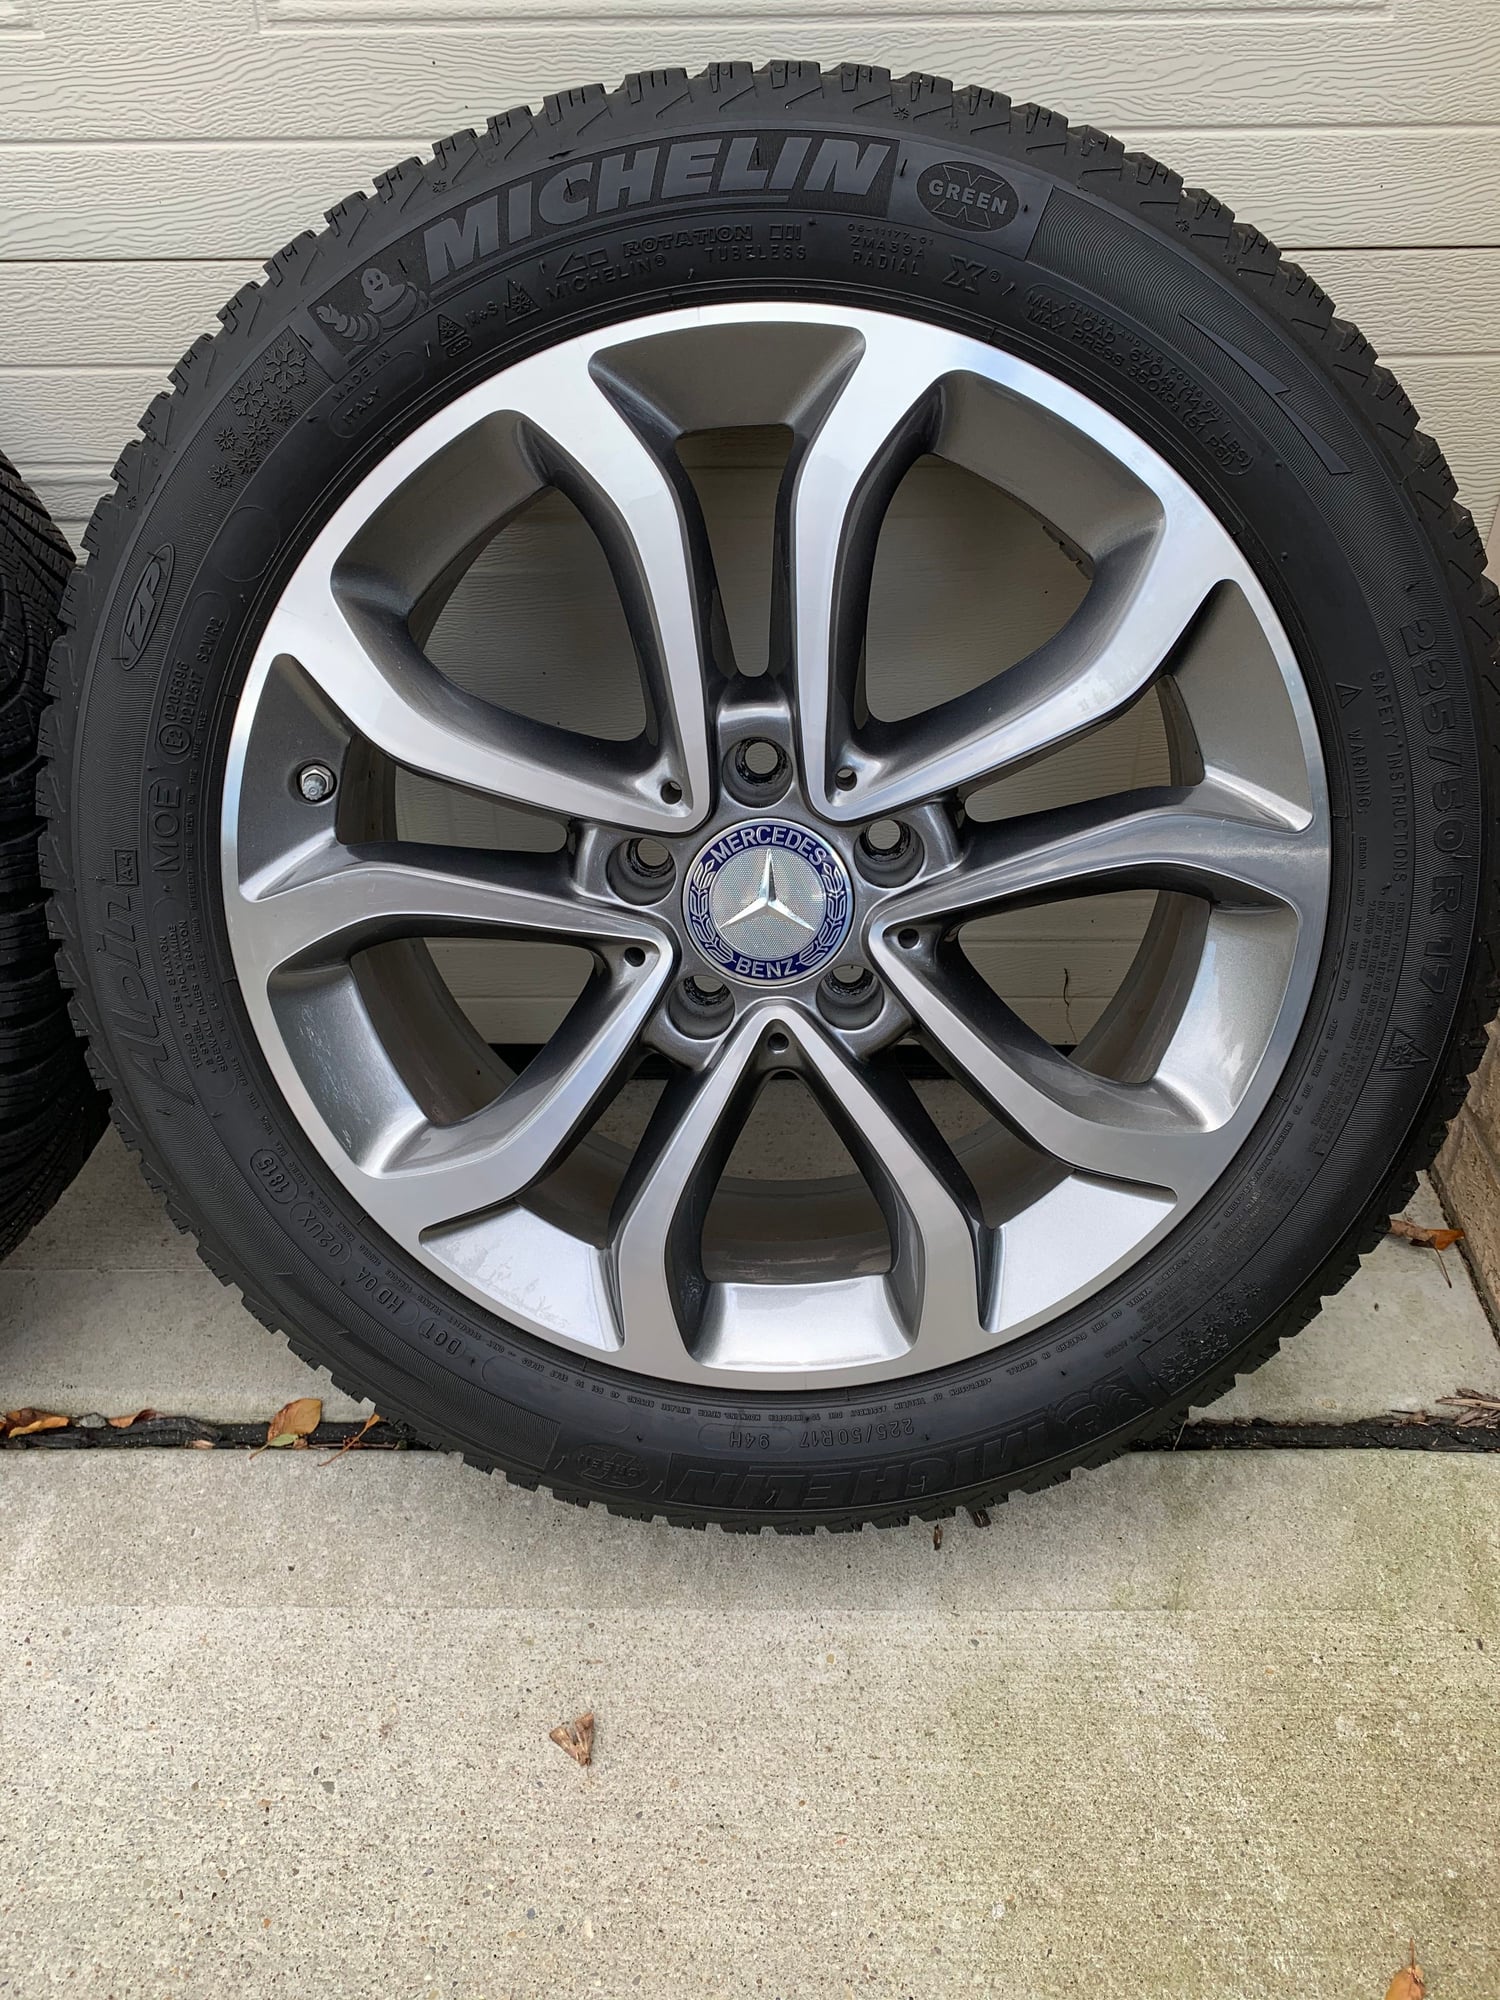 Wheels and Tires/Axles - W205 C300 17" OEM winter wheels with Alpin tires & TPMS! - Used - 2014 to 2020 Mercedes-Benz C300 - Pittsburgh, PA 15229, United States